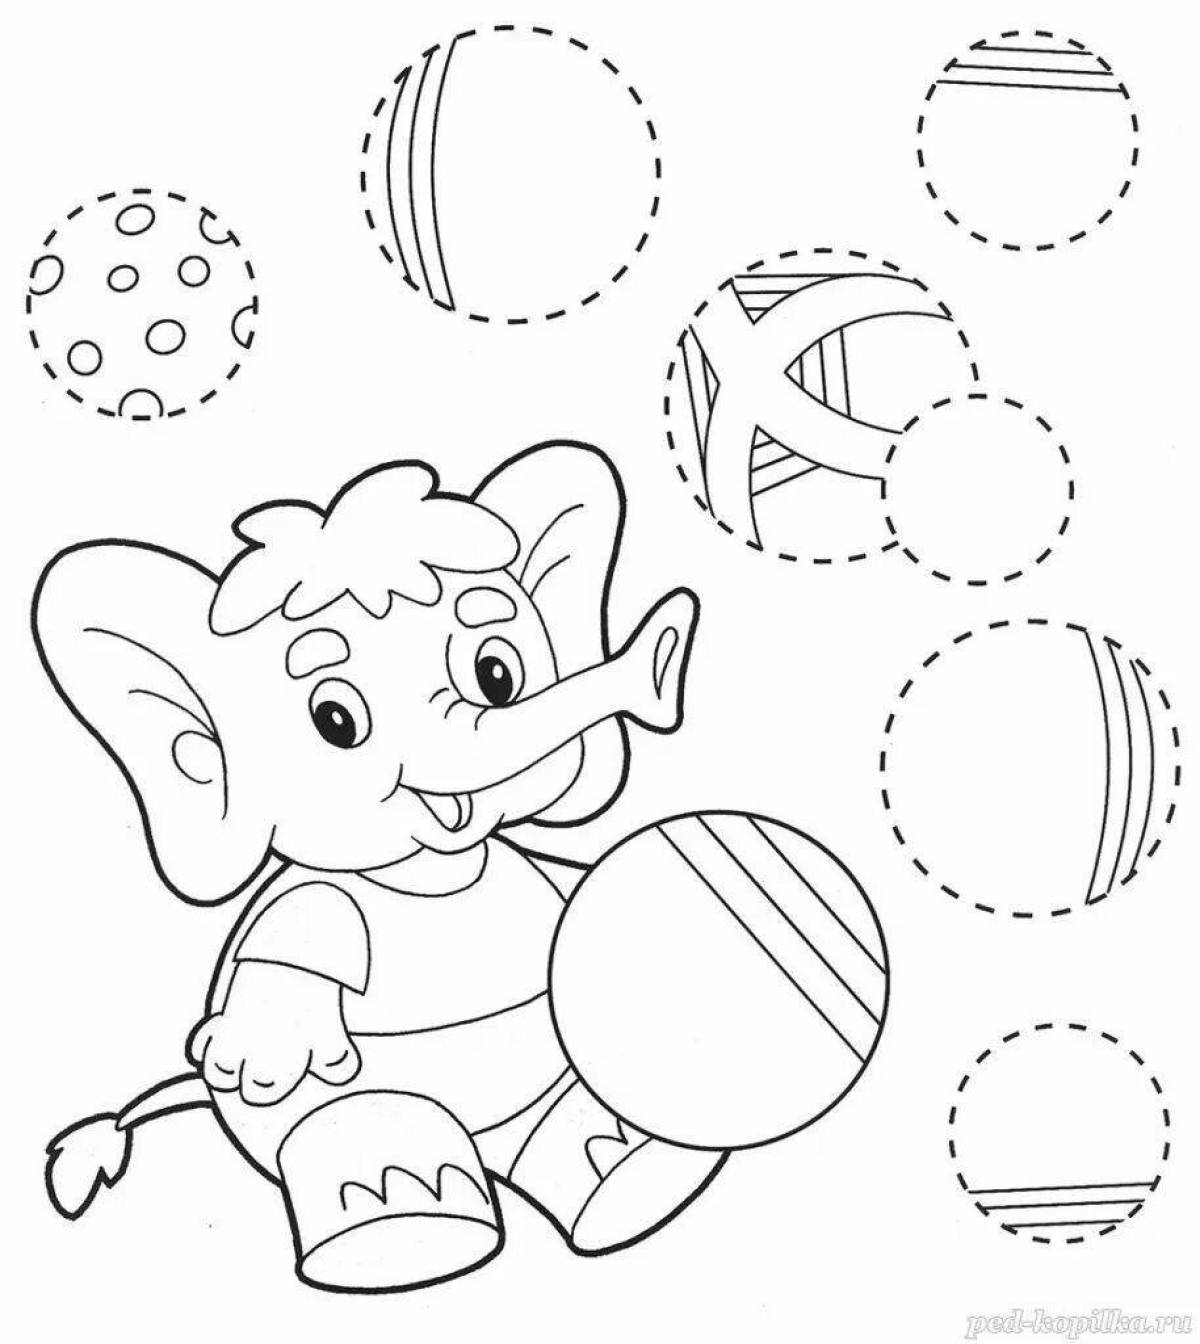 Bright coloring page 6 years educational